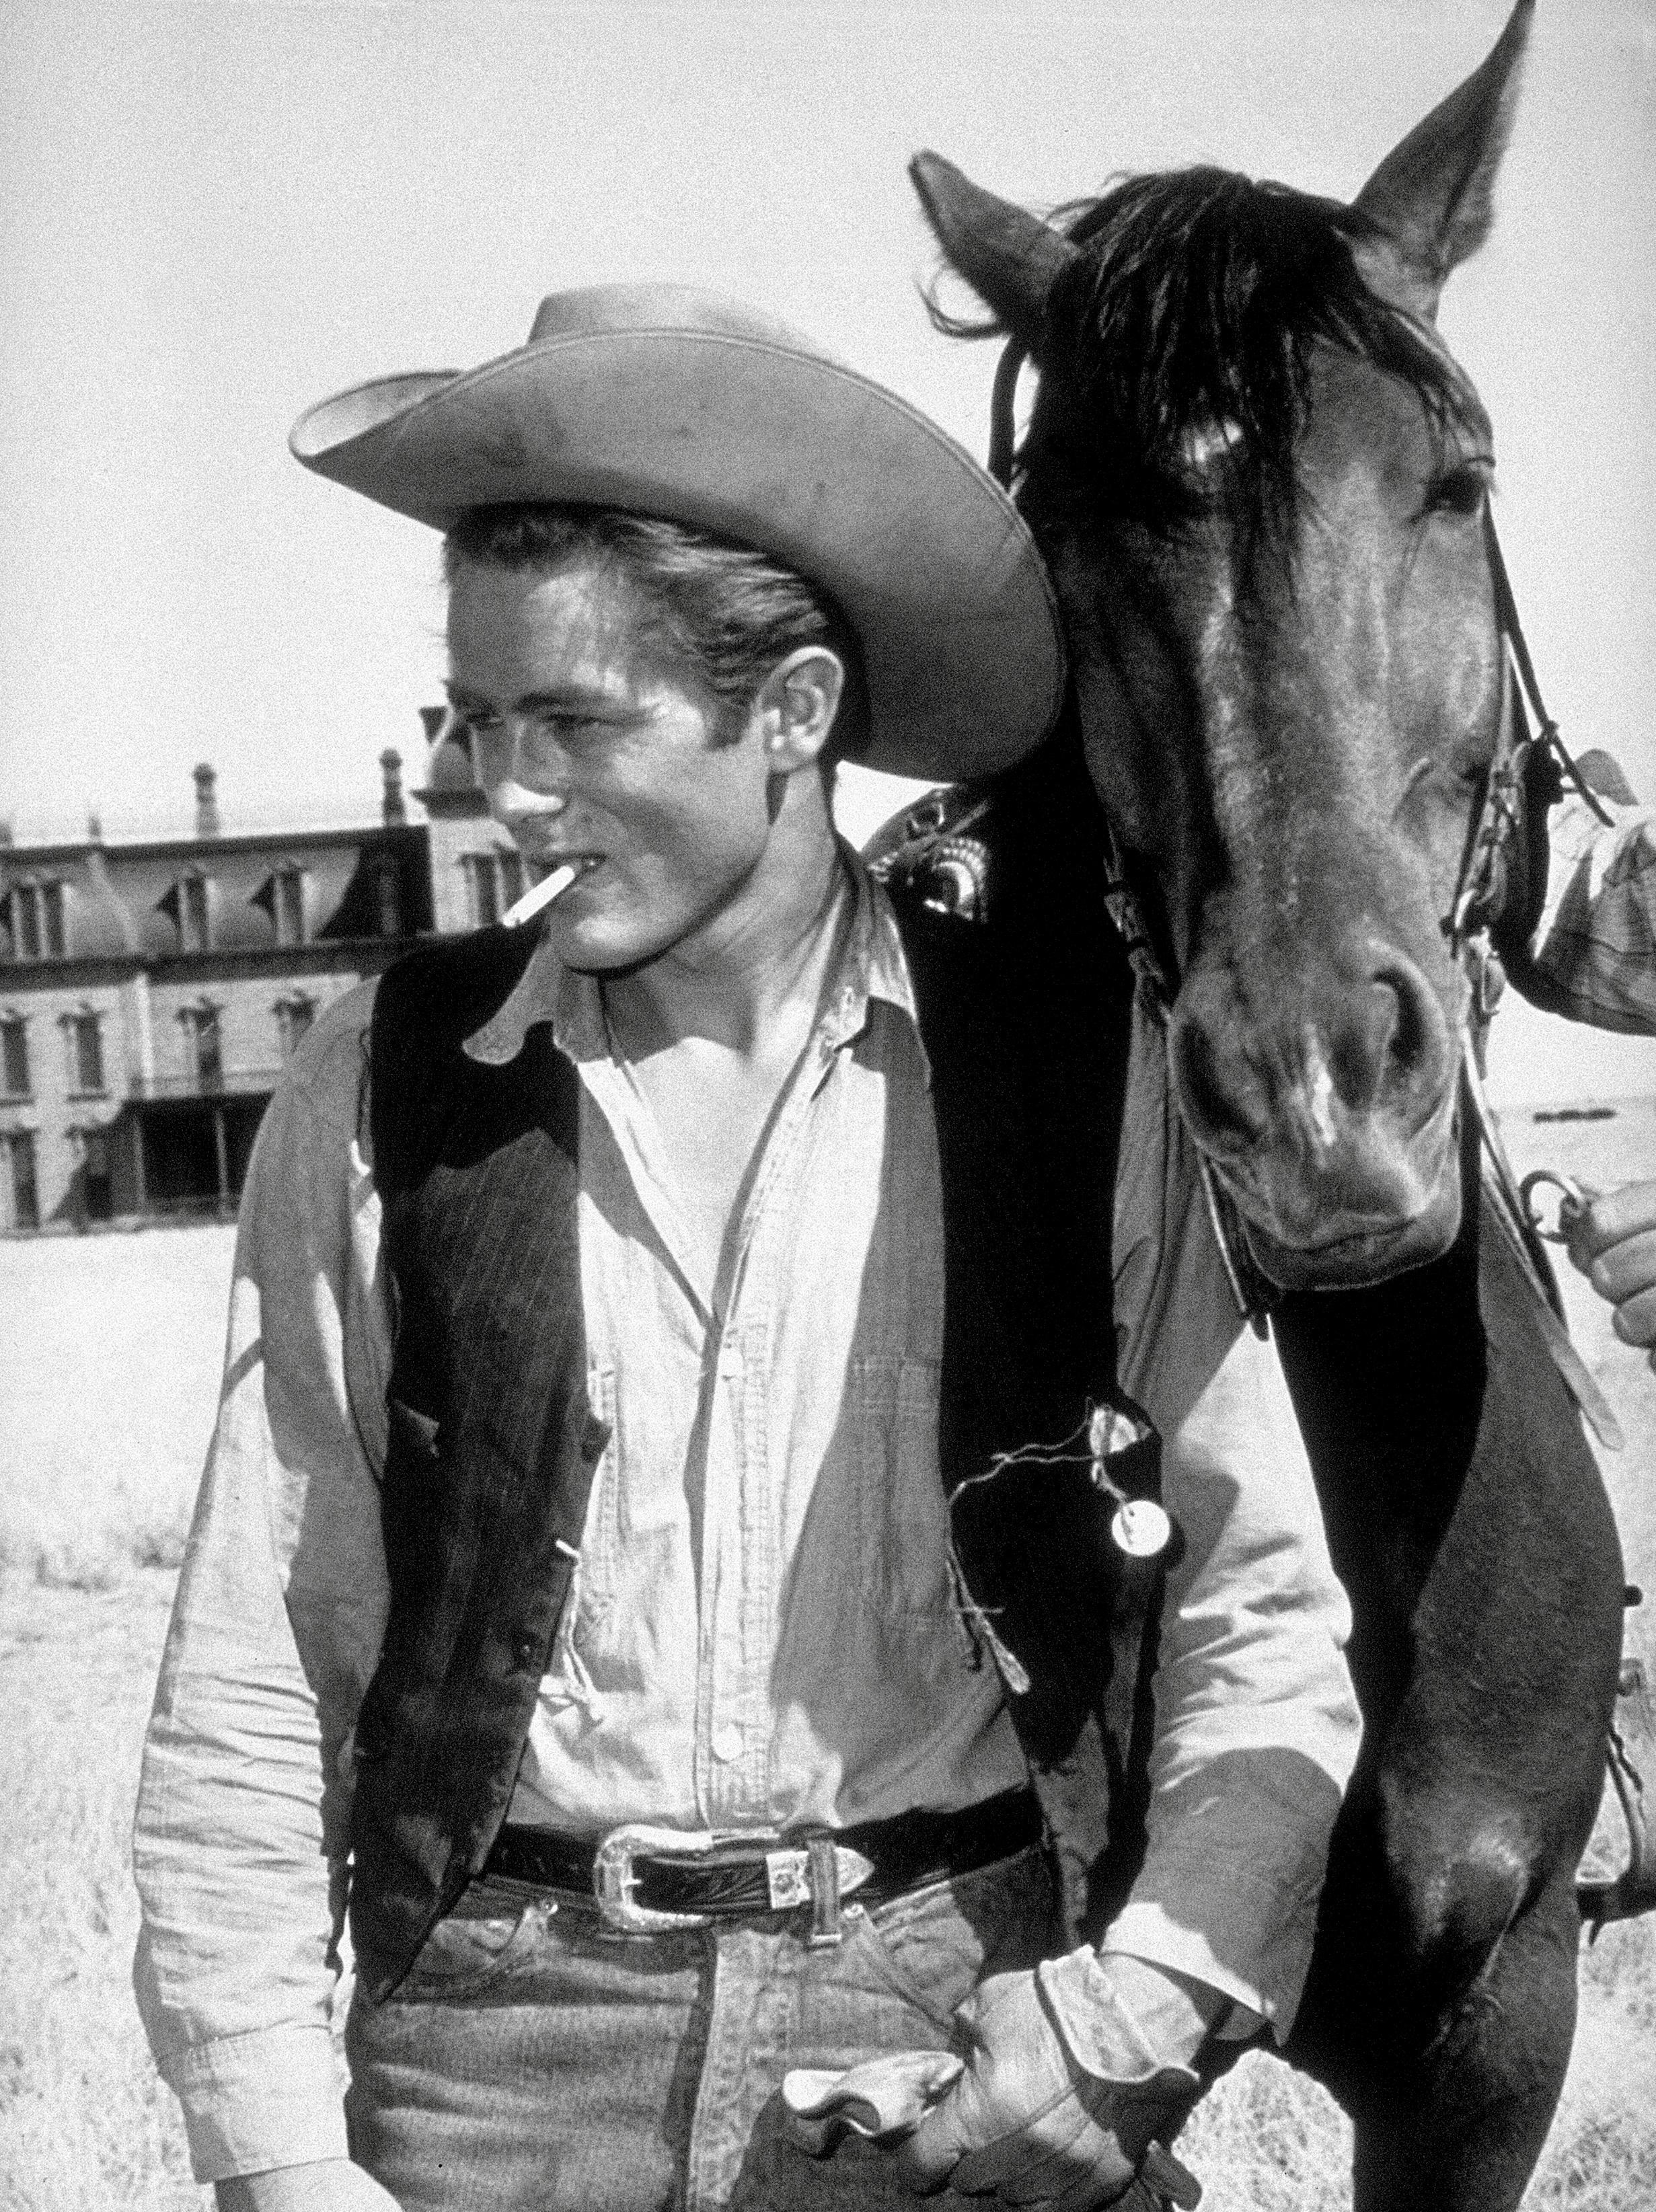 Unknown Portrait Photograph - James Dean with Horse in "Giant" Globe Photos Fine Art Print